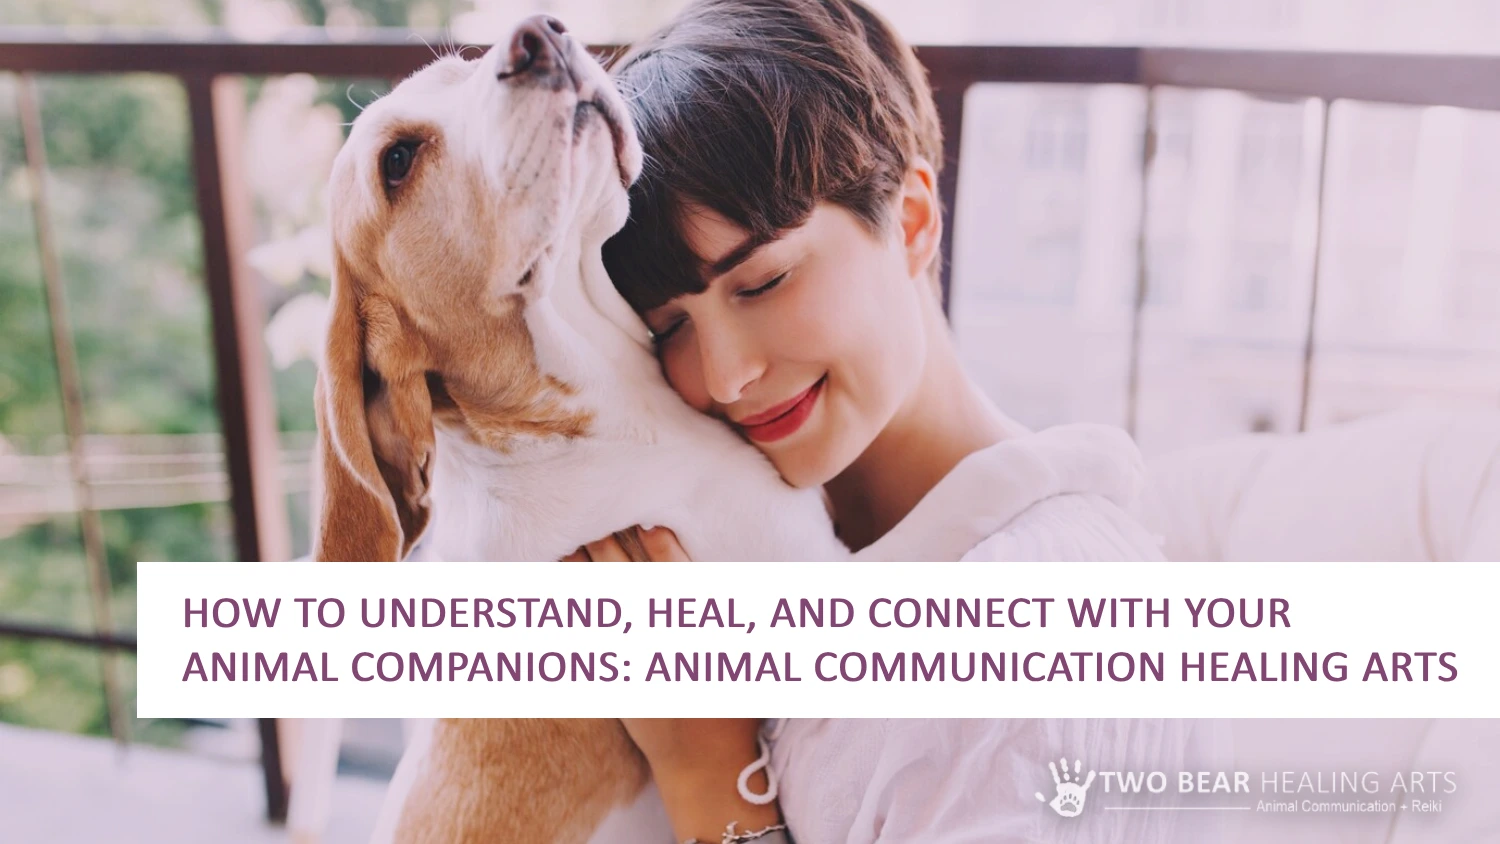 Build a deeper bond with your furry friend! Image features a woman and her dog, advertising animal communication sessions from Two Bear Healing Arts to understand your pet's thoughts and feelings.